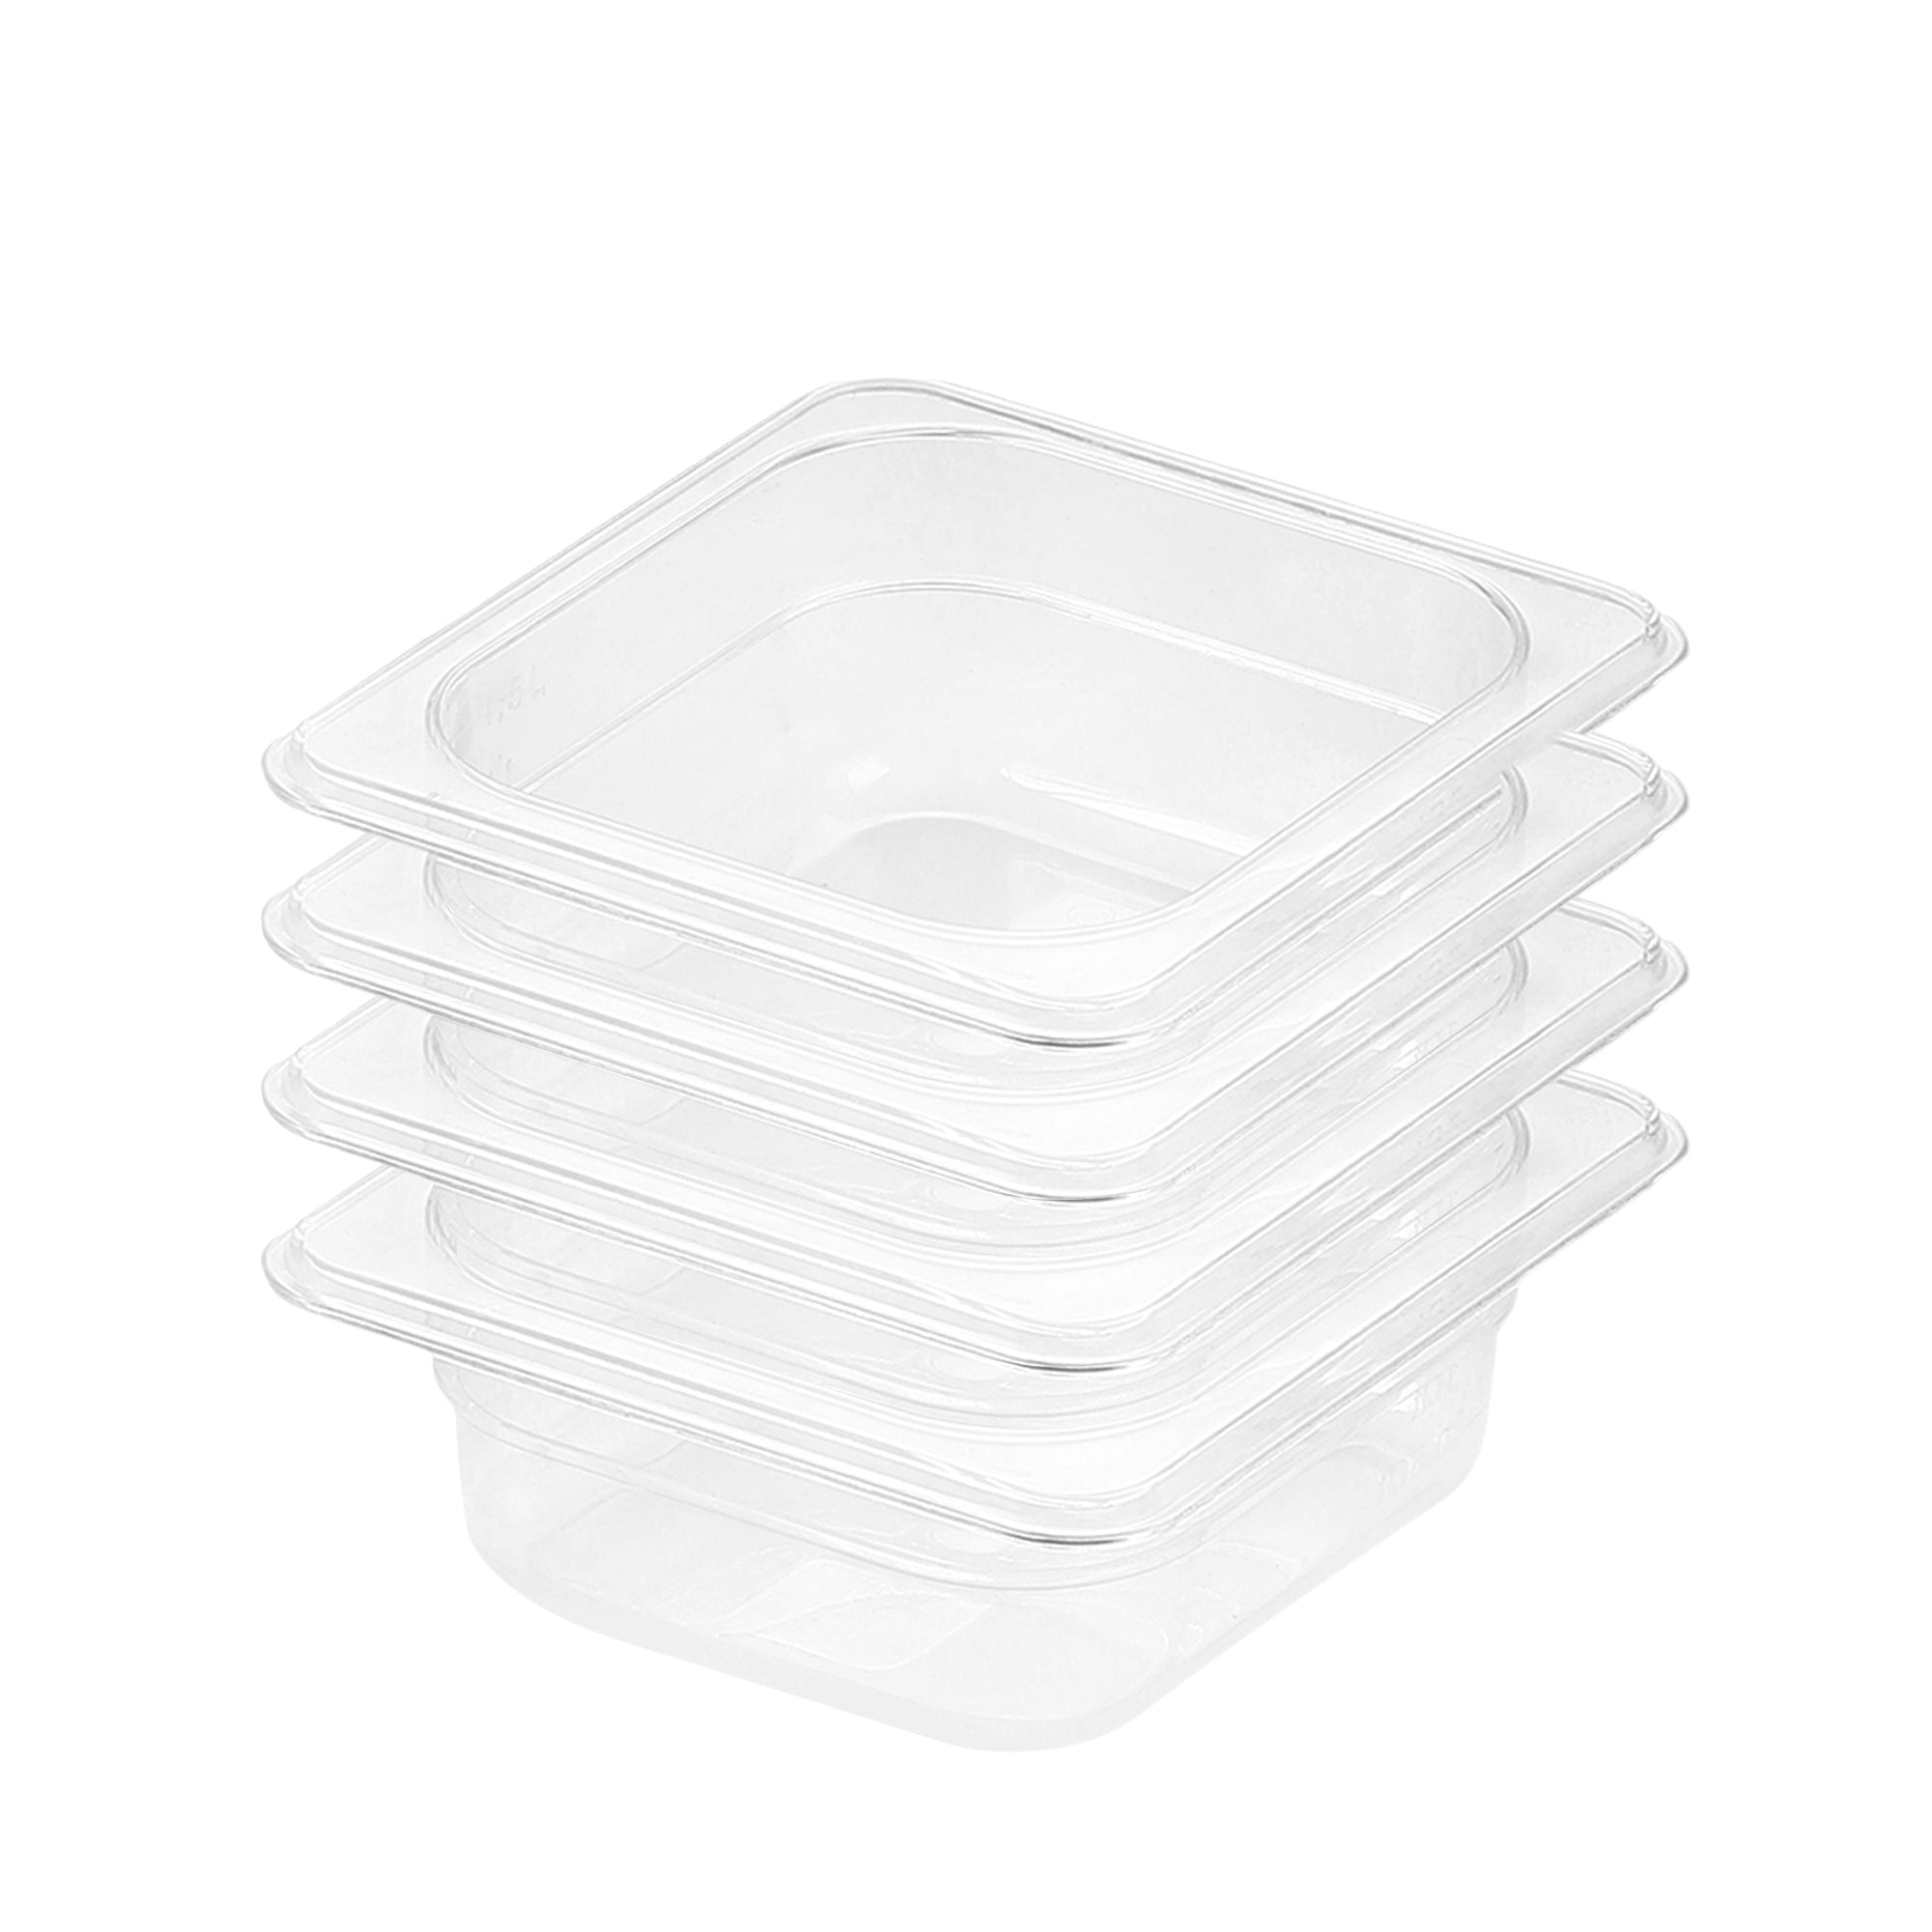 SOGA 65mm Clear Gastronorm GN Pan 1/6 Food Tray Storage Bundle of 4